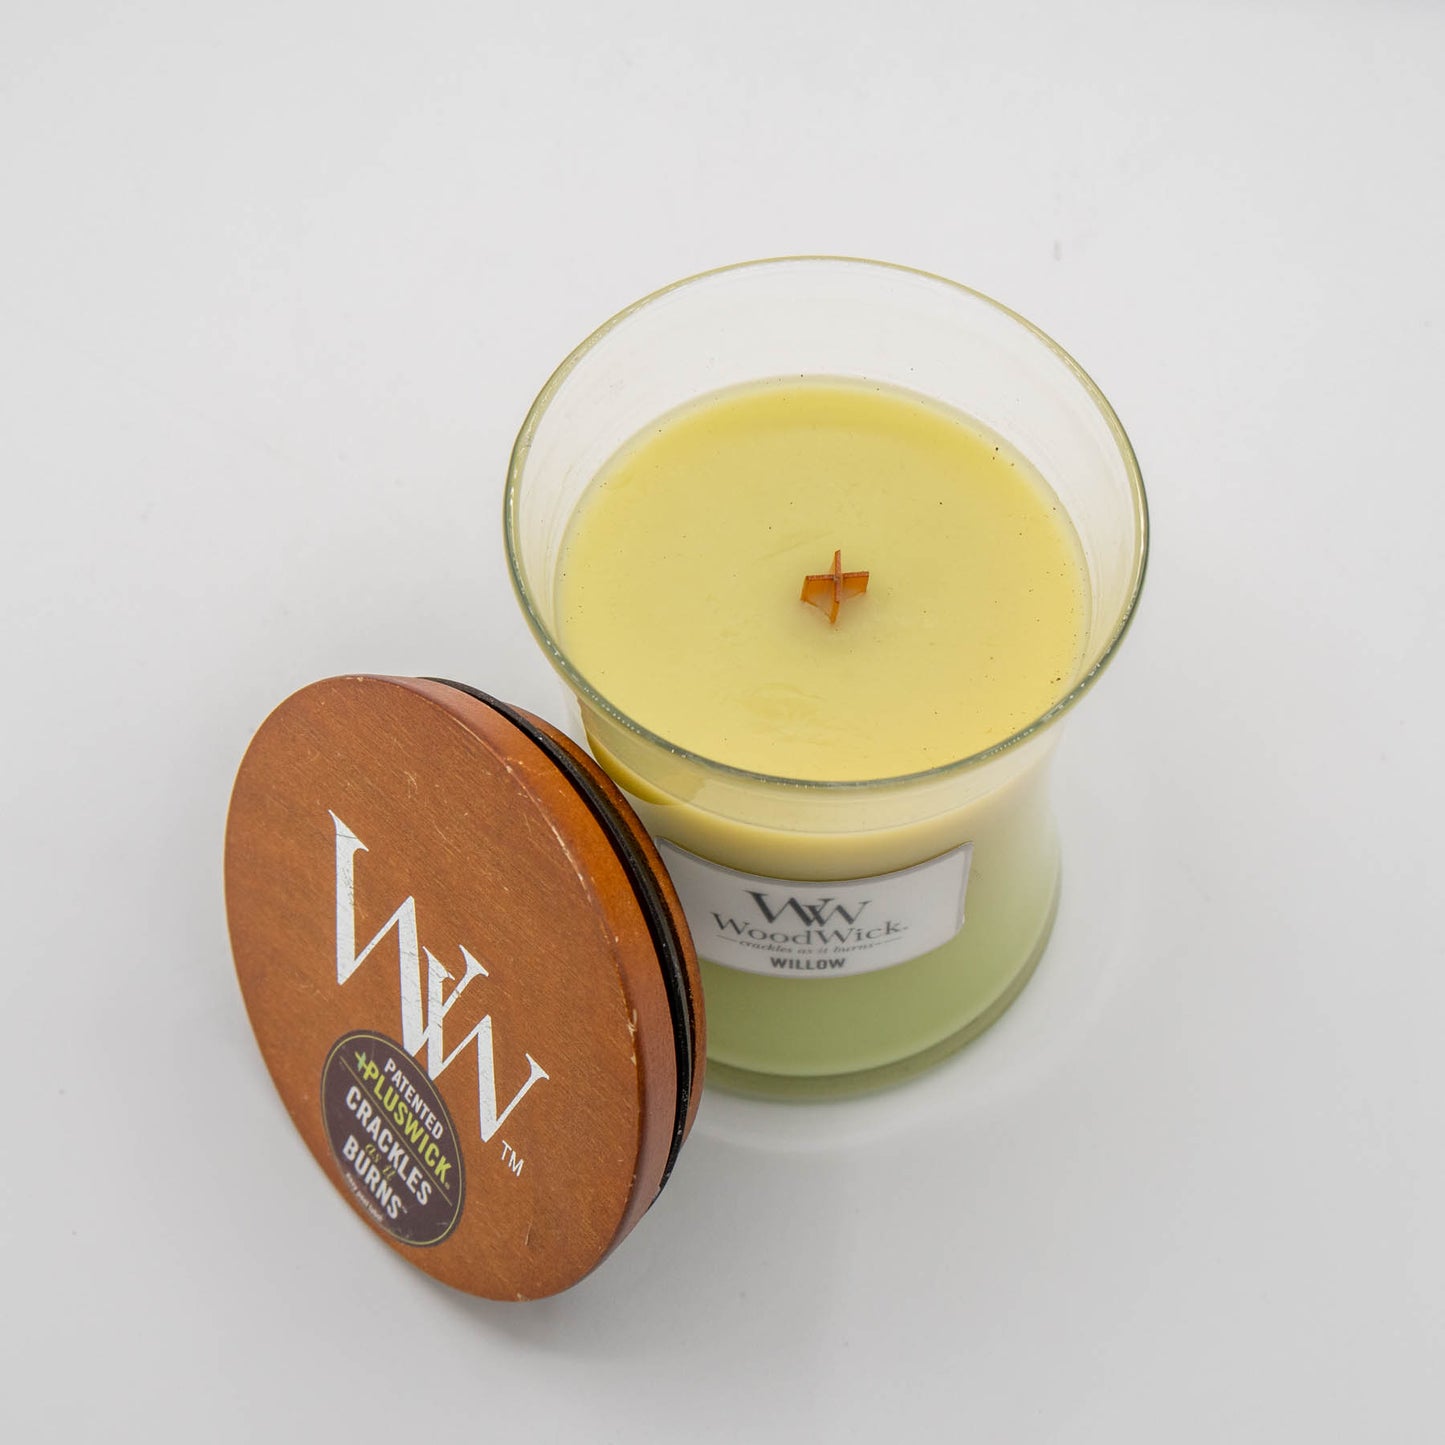 Wood Wick - Medium Cracking Candle - Willow